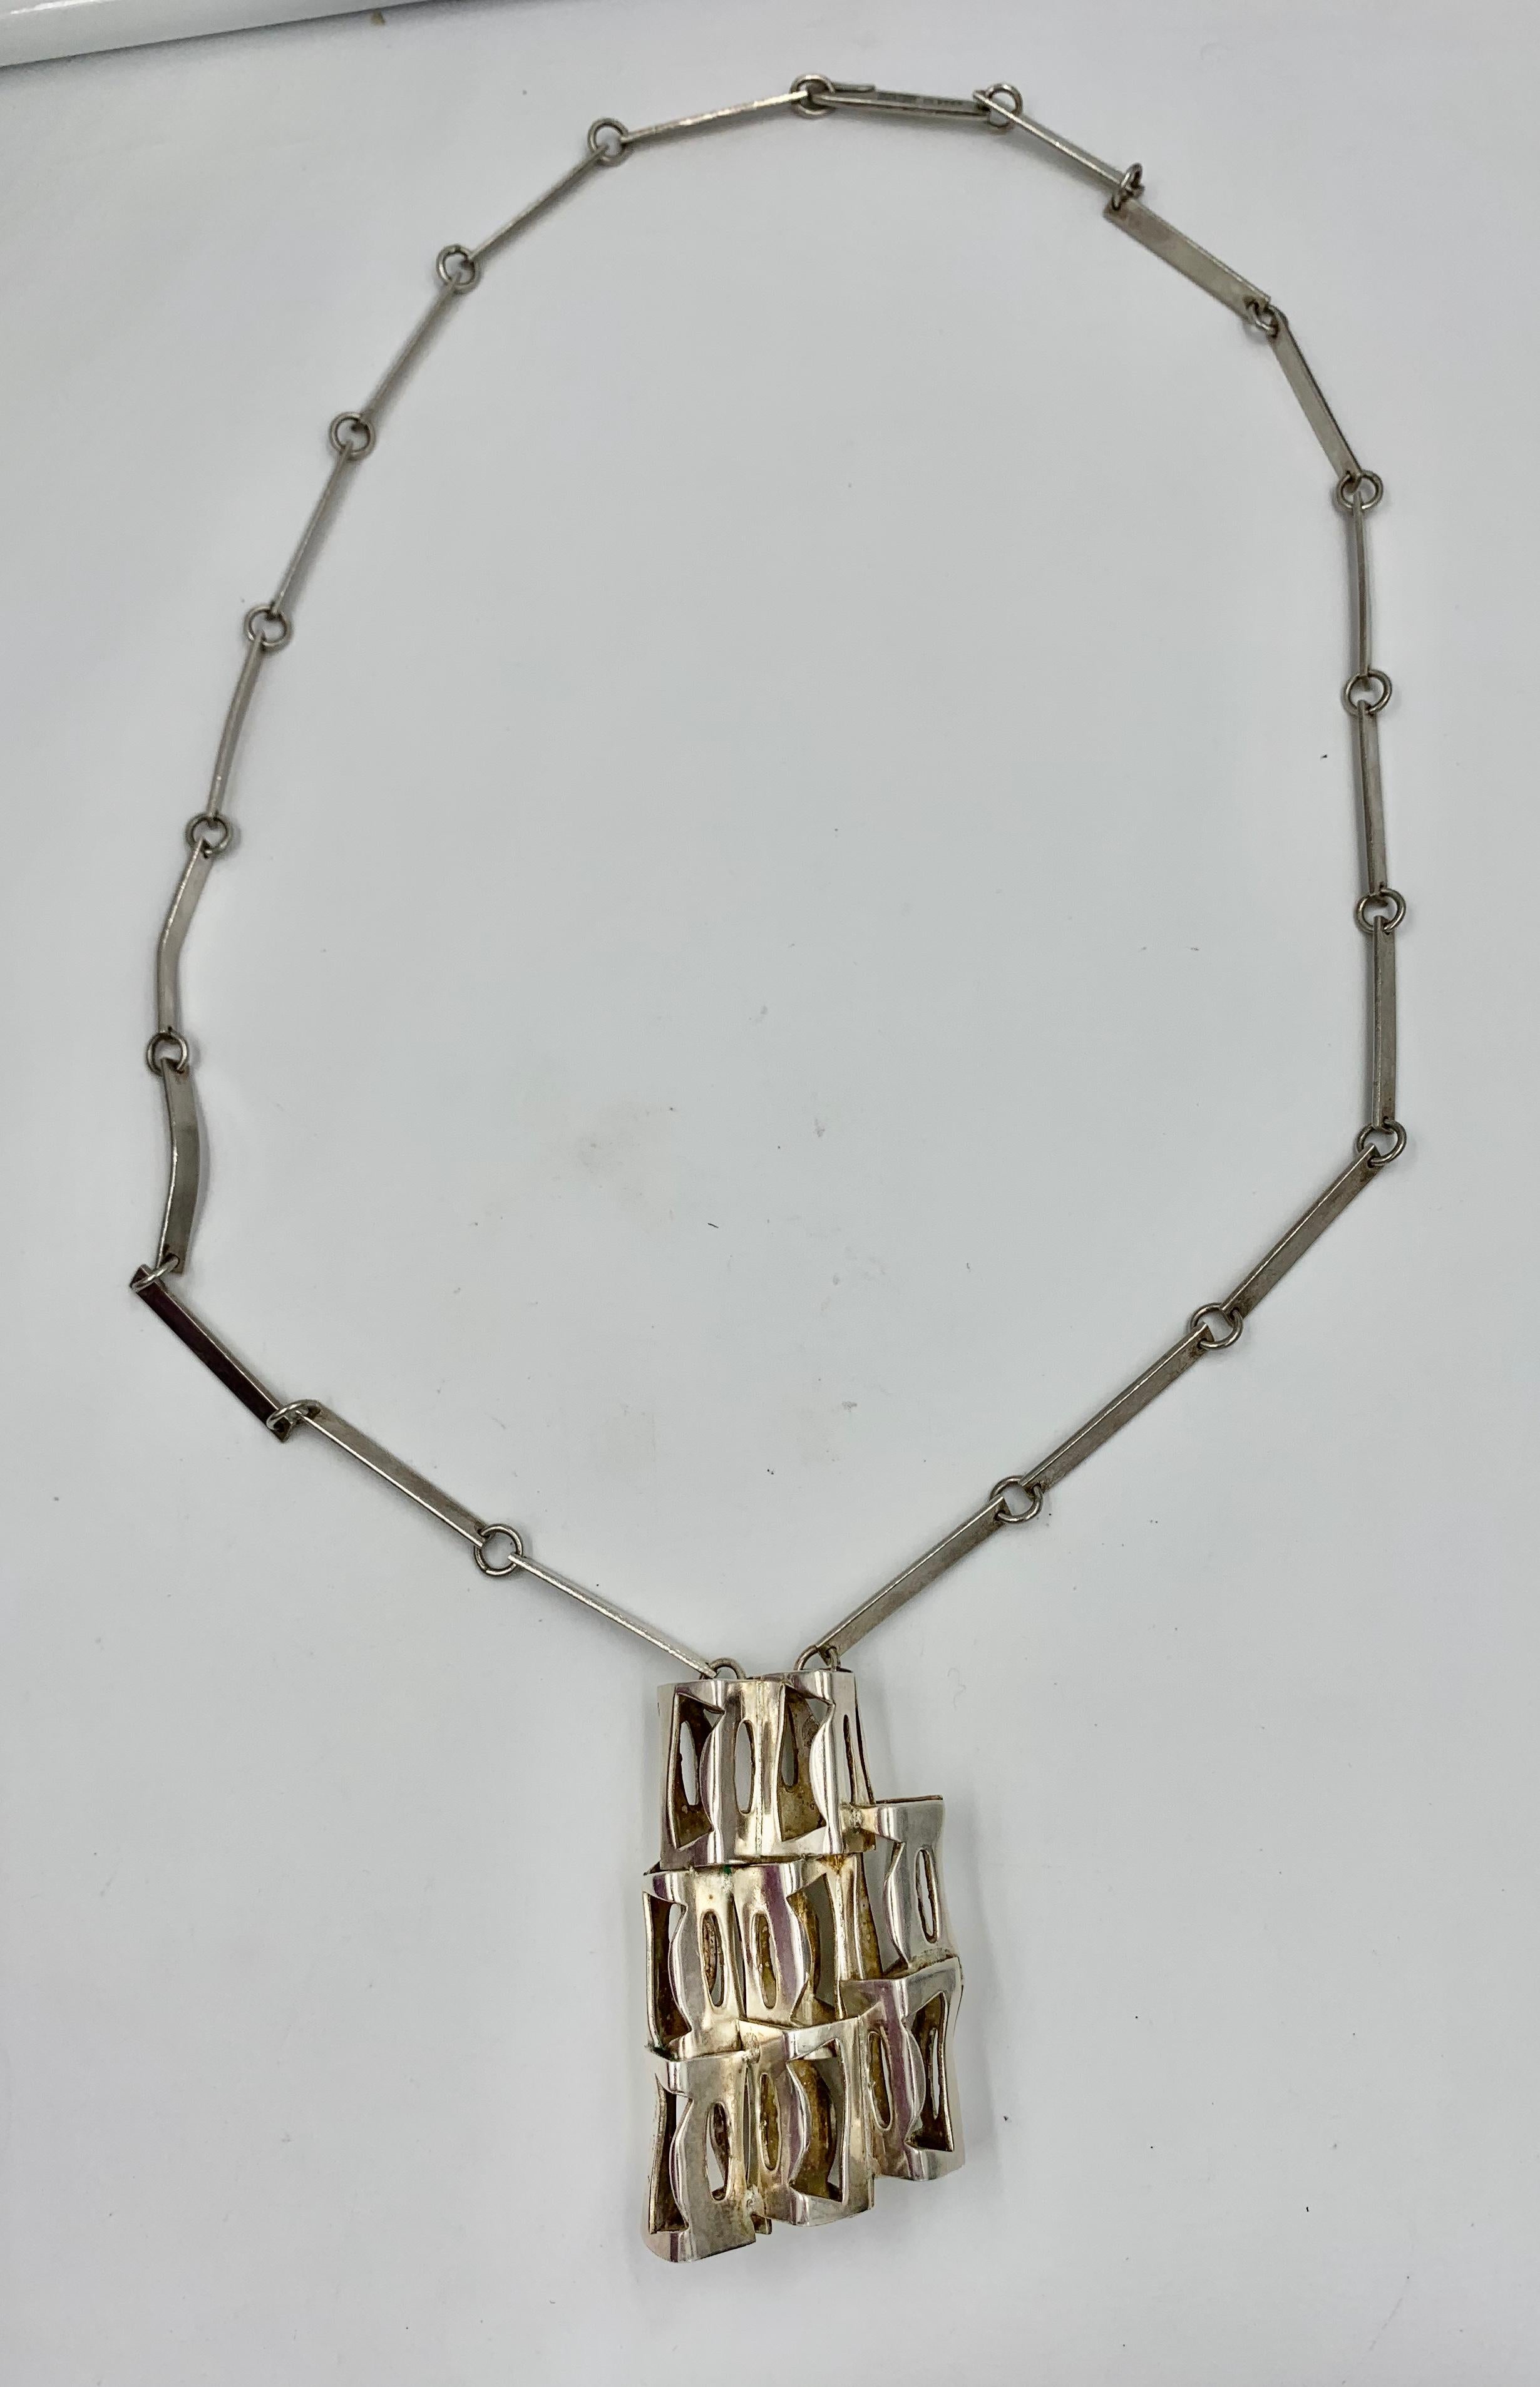 A very rare and special Necklace by Rey Urban for Age Fausing of Denmark.  The Sterling Silver masterpiece is signed Rey Urban.  Urban (1929 - 2015) is one of the most famous of the Scandinavian Mid-Century Modern Jewelry designers.  Urban was born